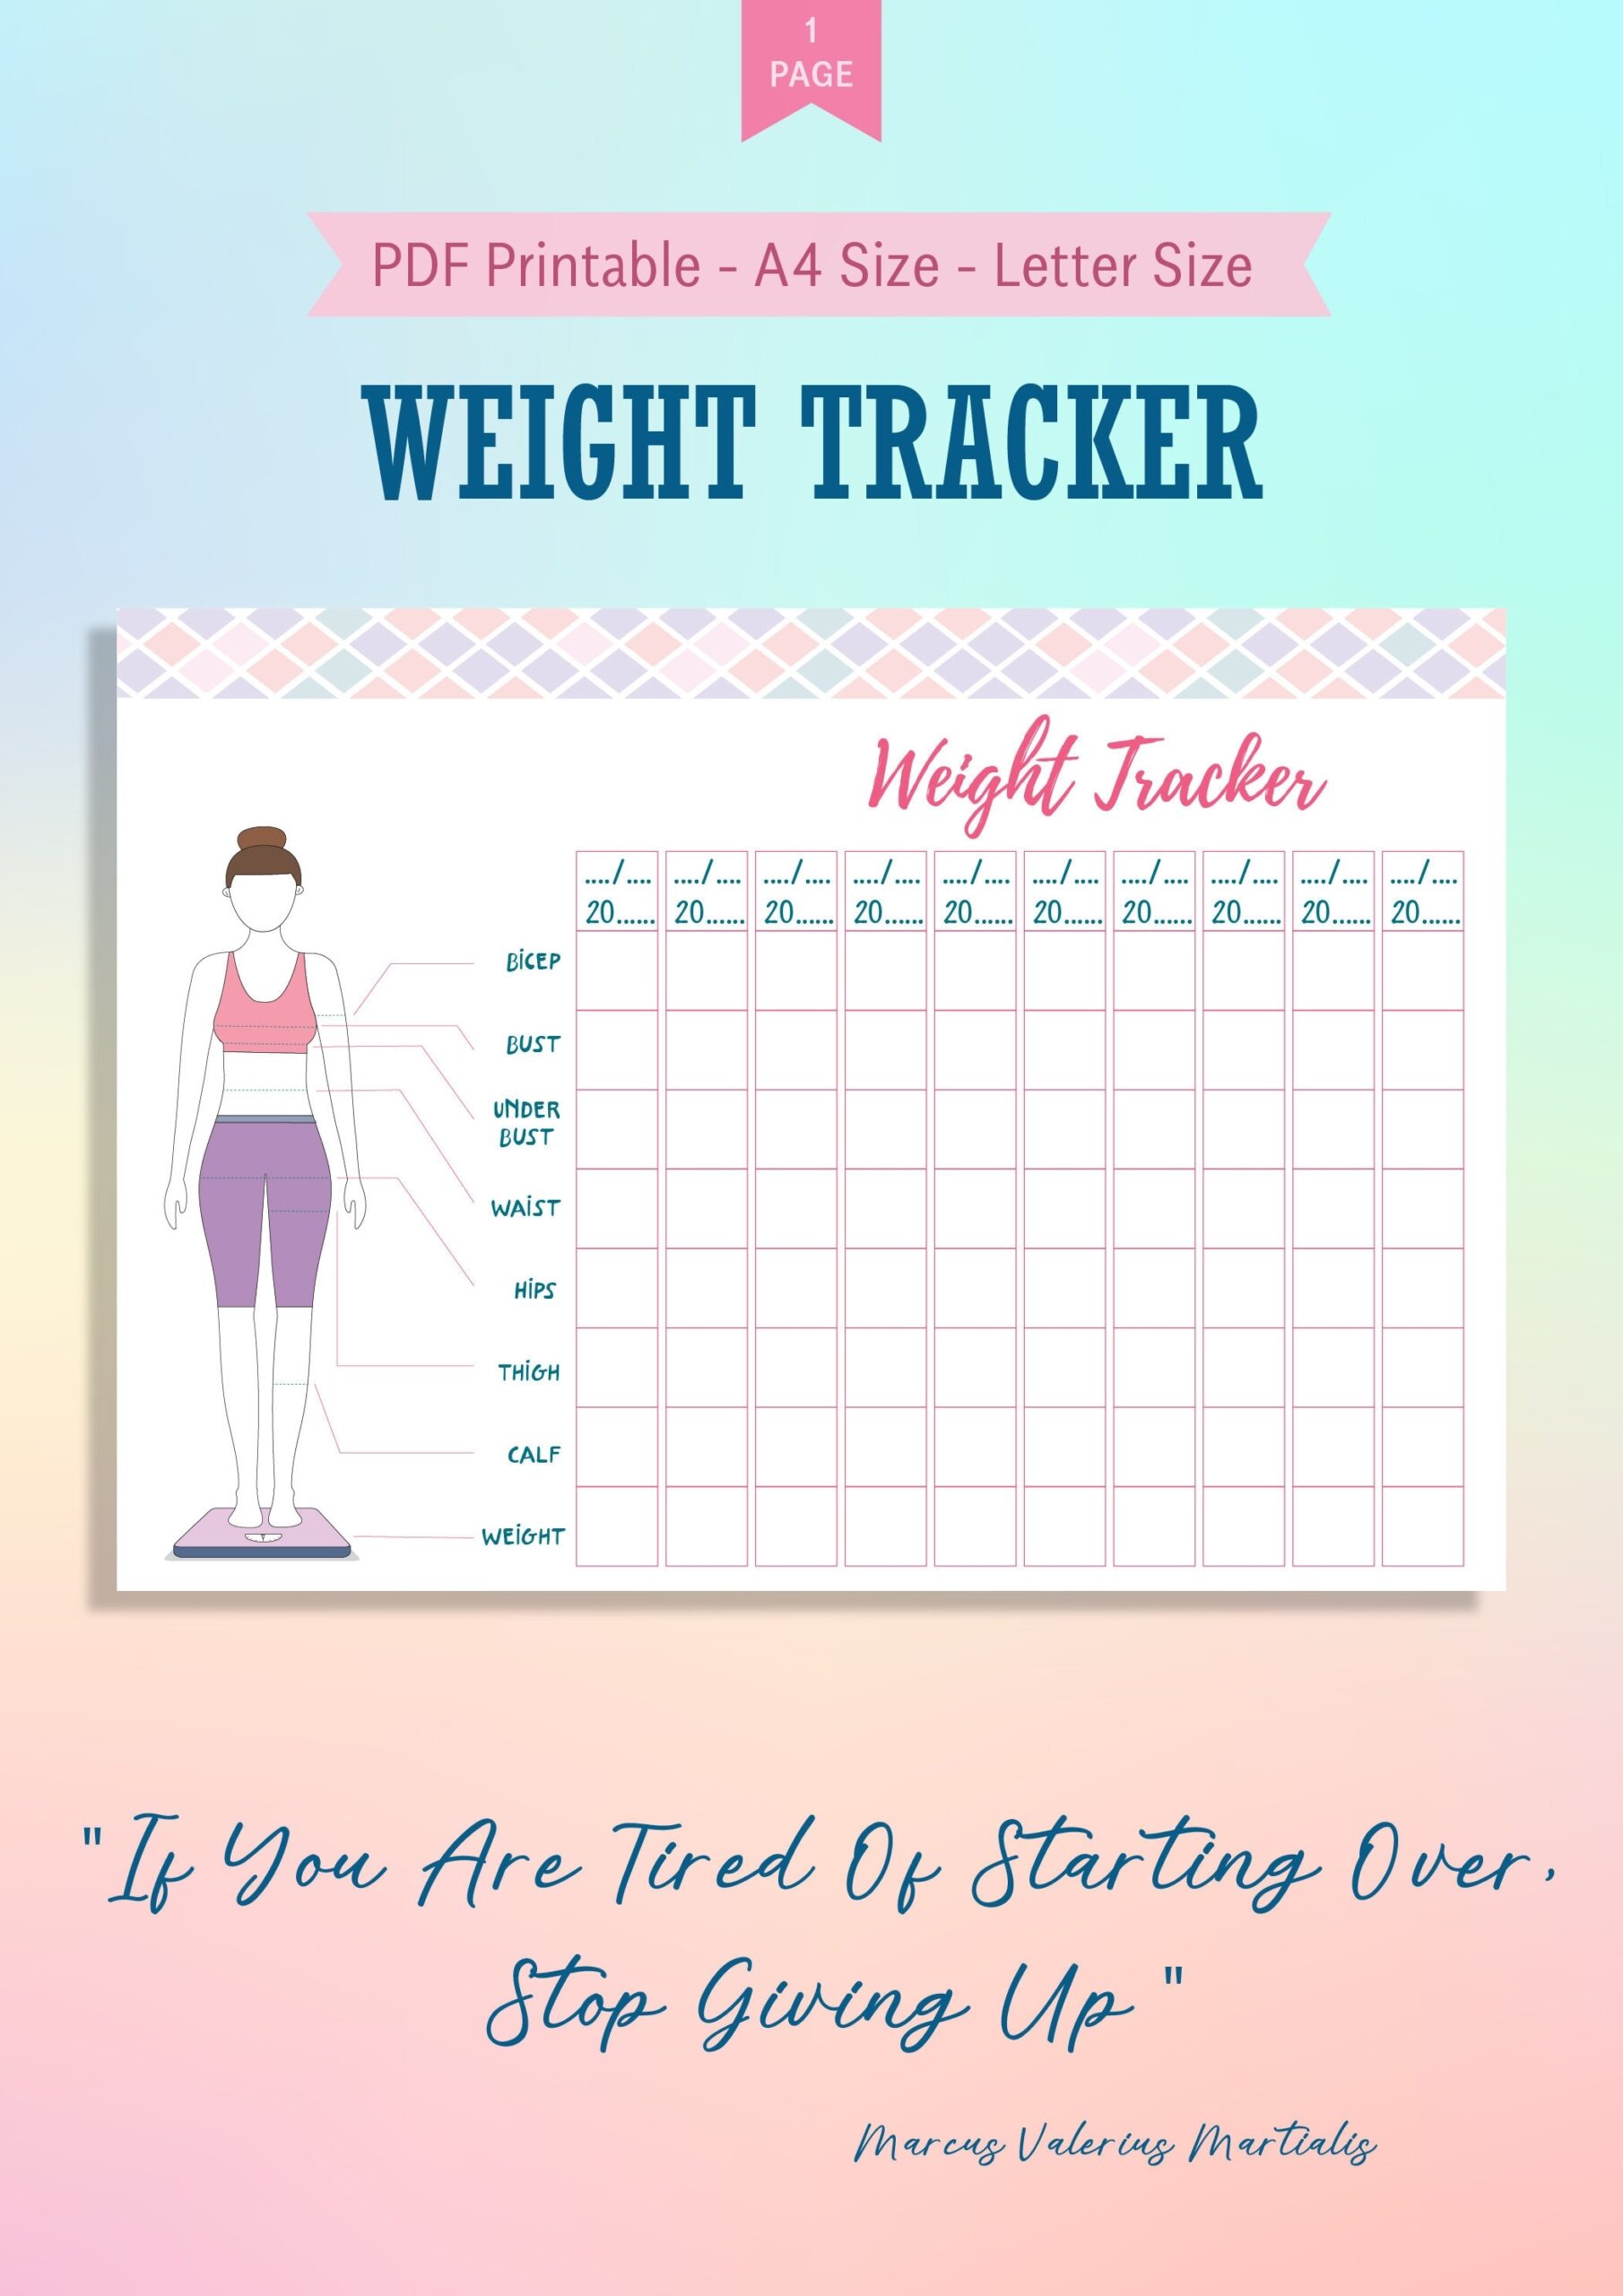 Weight Loss Tracker Printable Weight Loss Body Measurement Etsy de